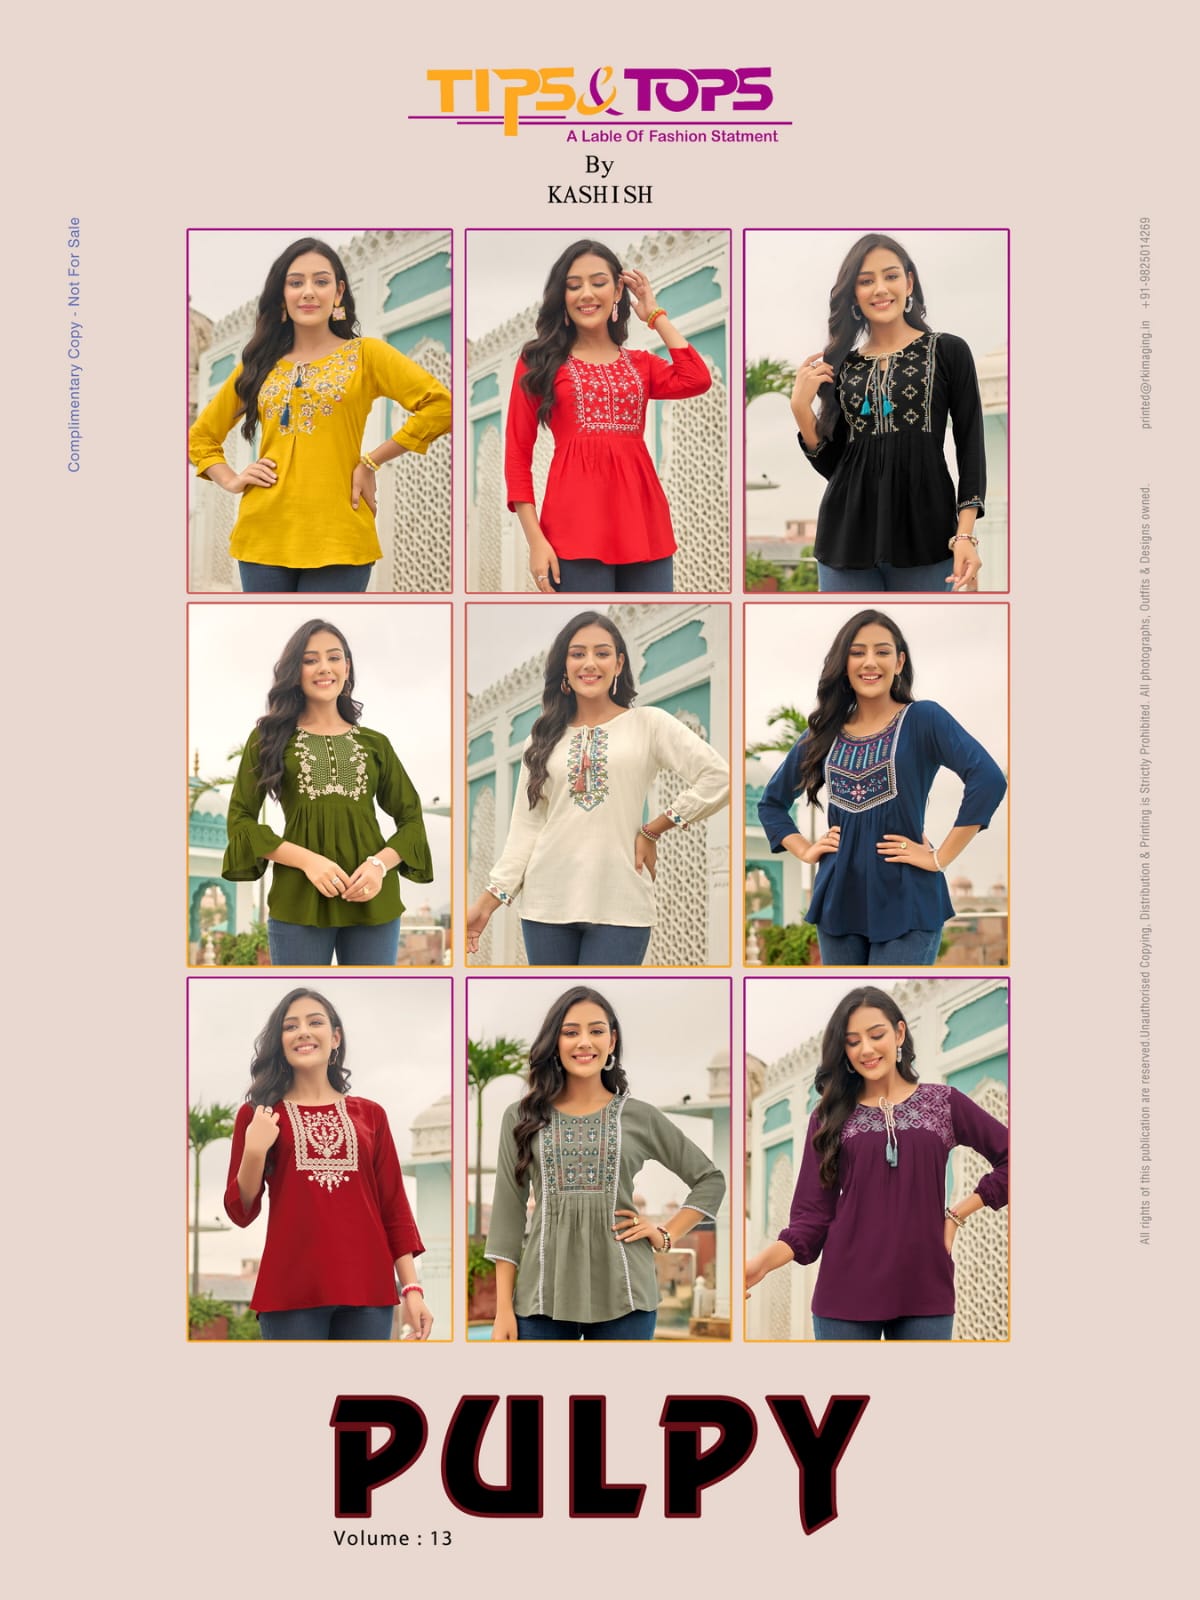 Tips Tops Pulpy Vol 13 Ladies Tops Catalog collection 7